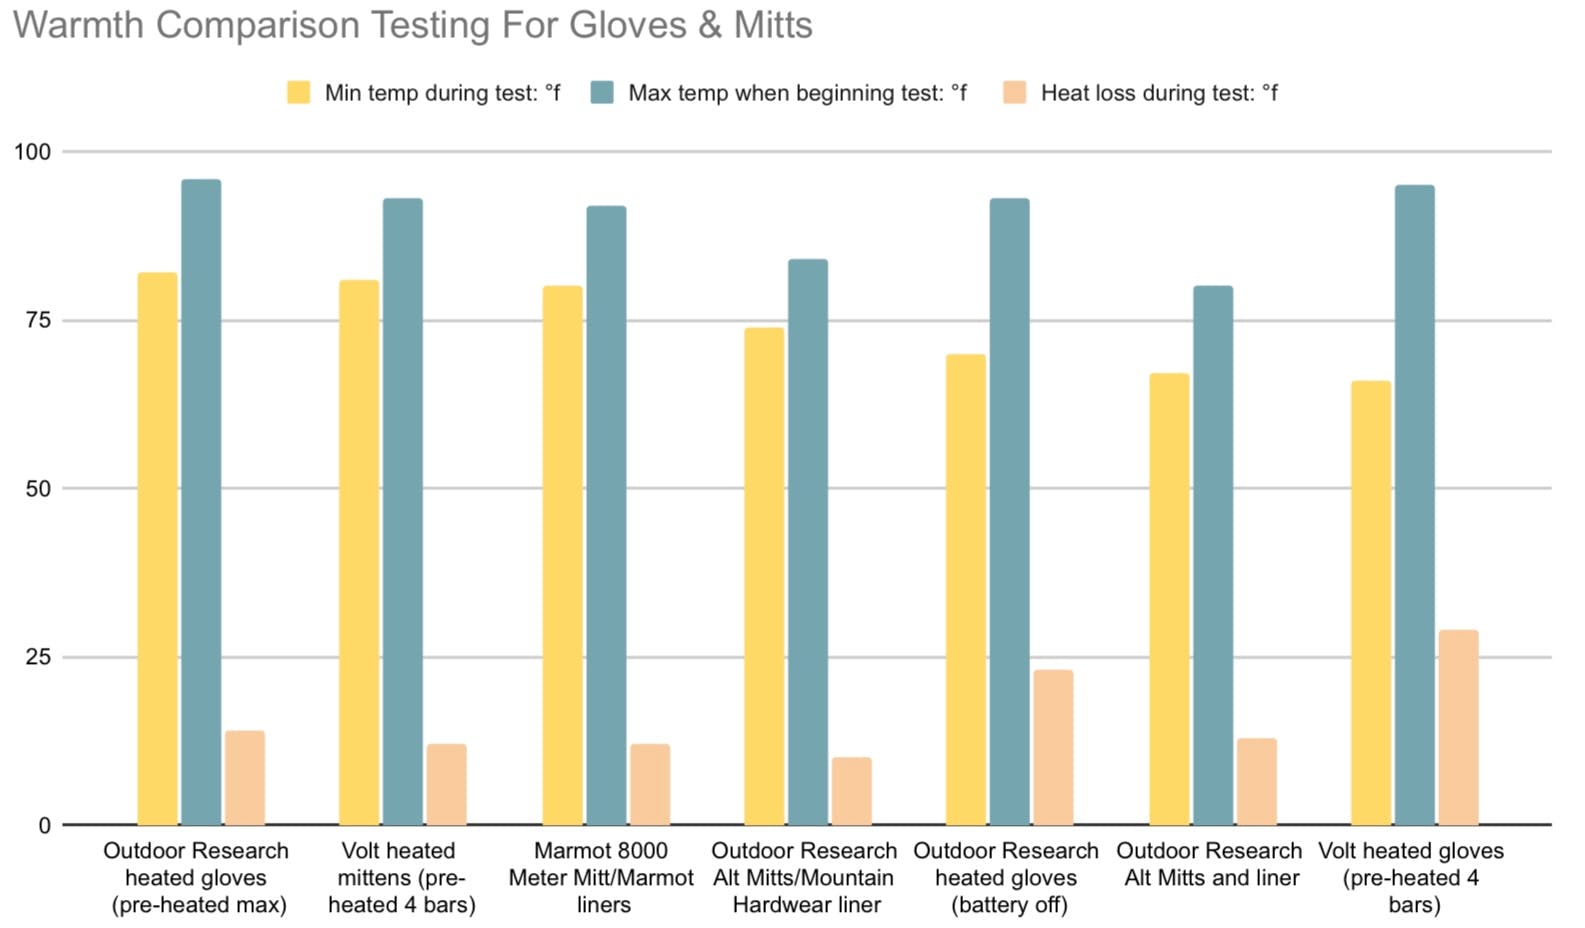 Graph comparing the warmth of gloves and mittens.